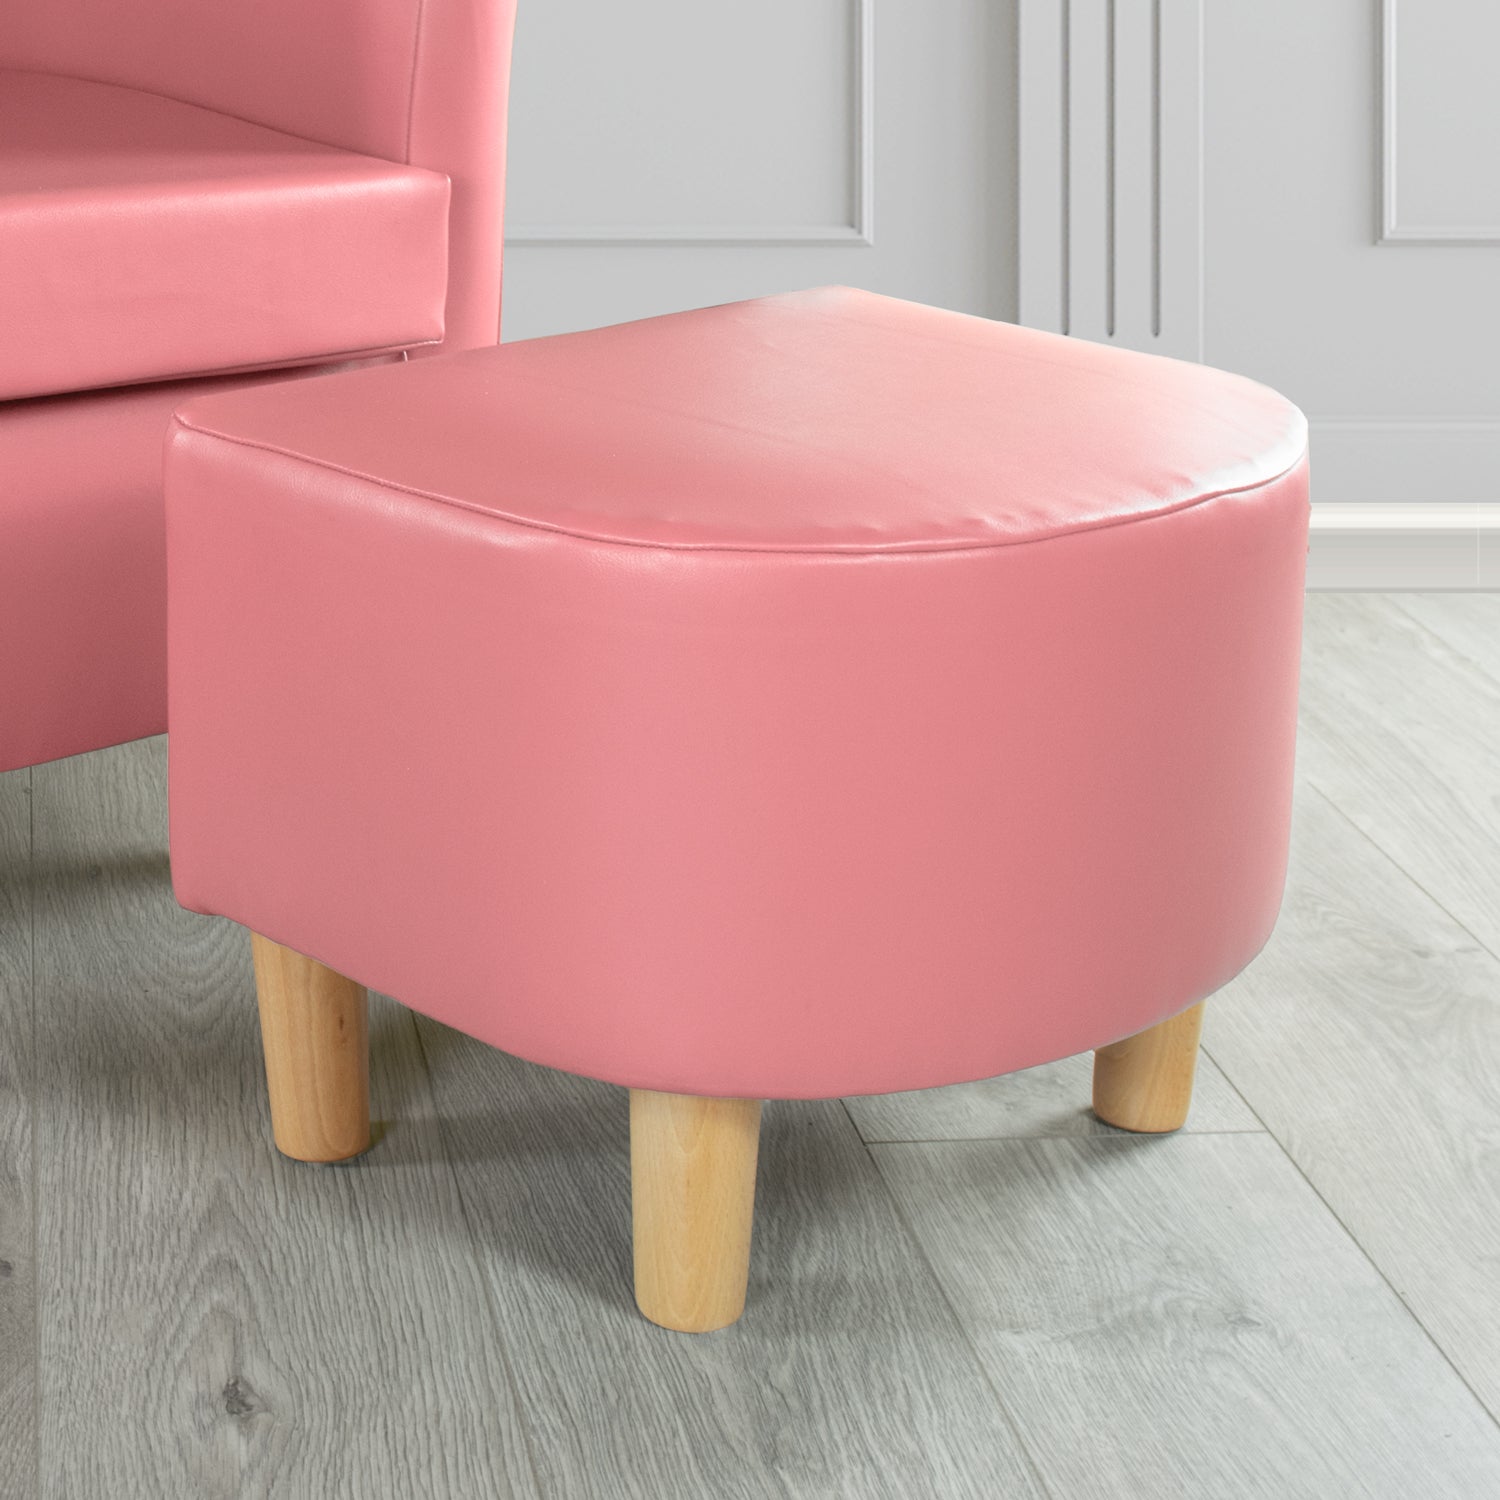 Tuscany Just Colour Cherry Blossom Faux Leather Footstool (4601096536106)